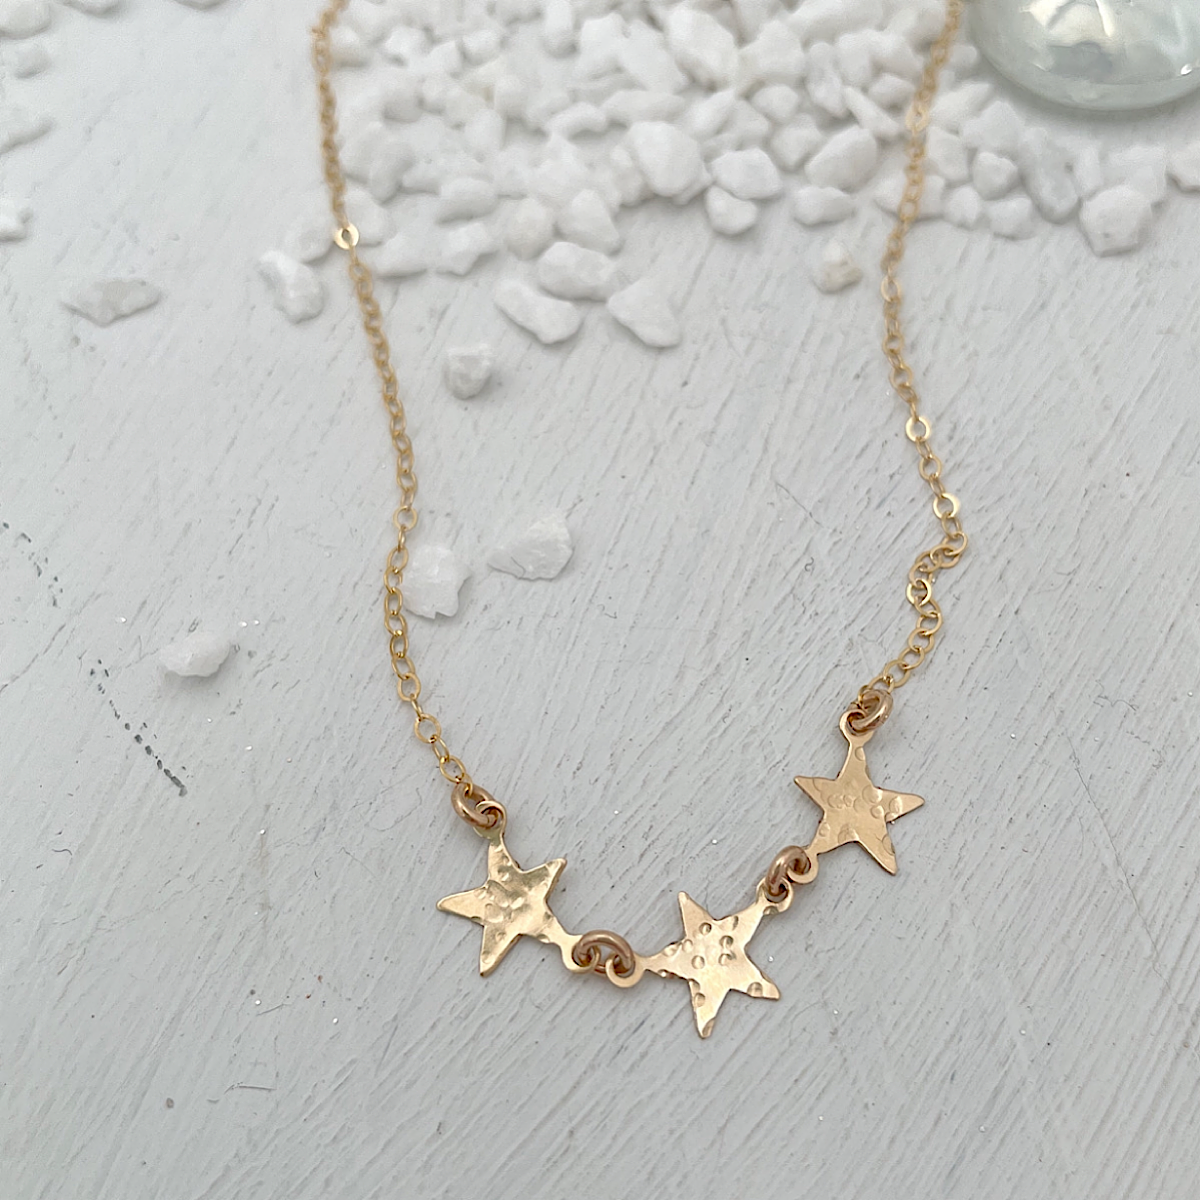 Darling Stars Necklace